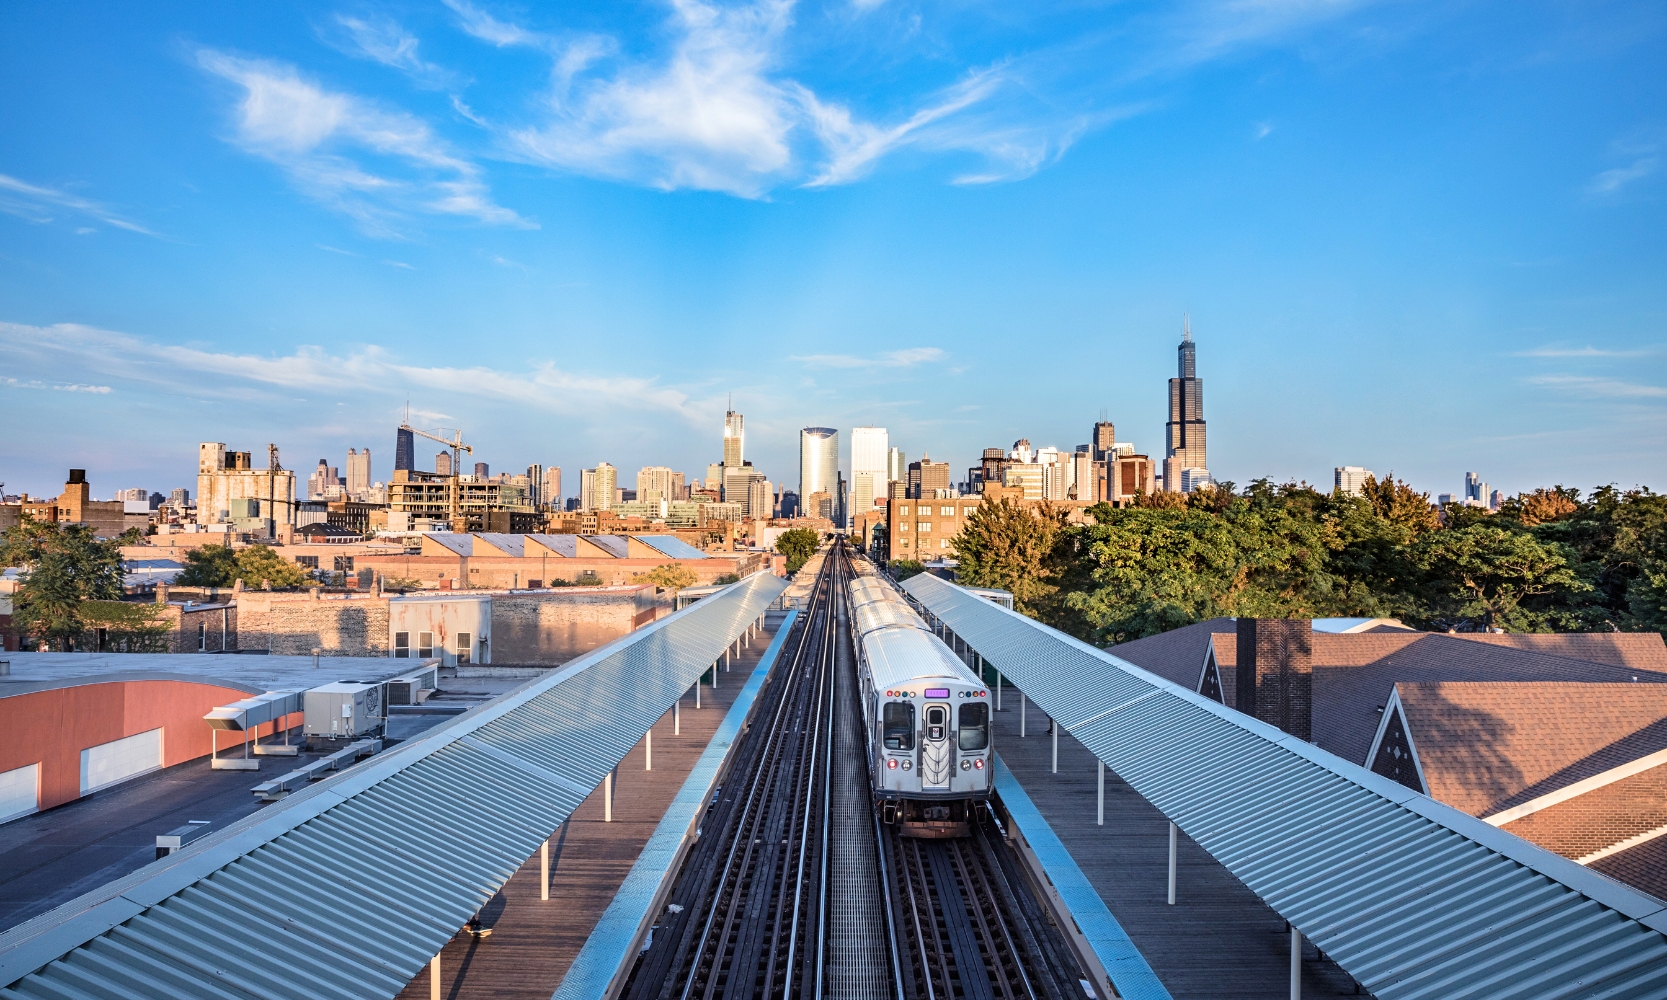 An image of a Chicago public train traveling into downtown Chicago with the Chicago skyline behind it